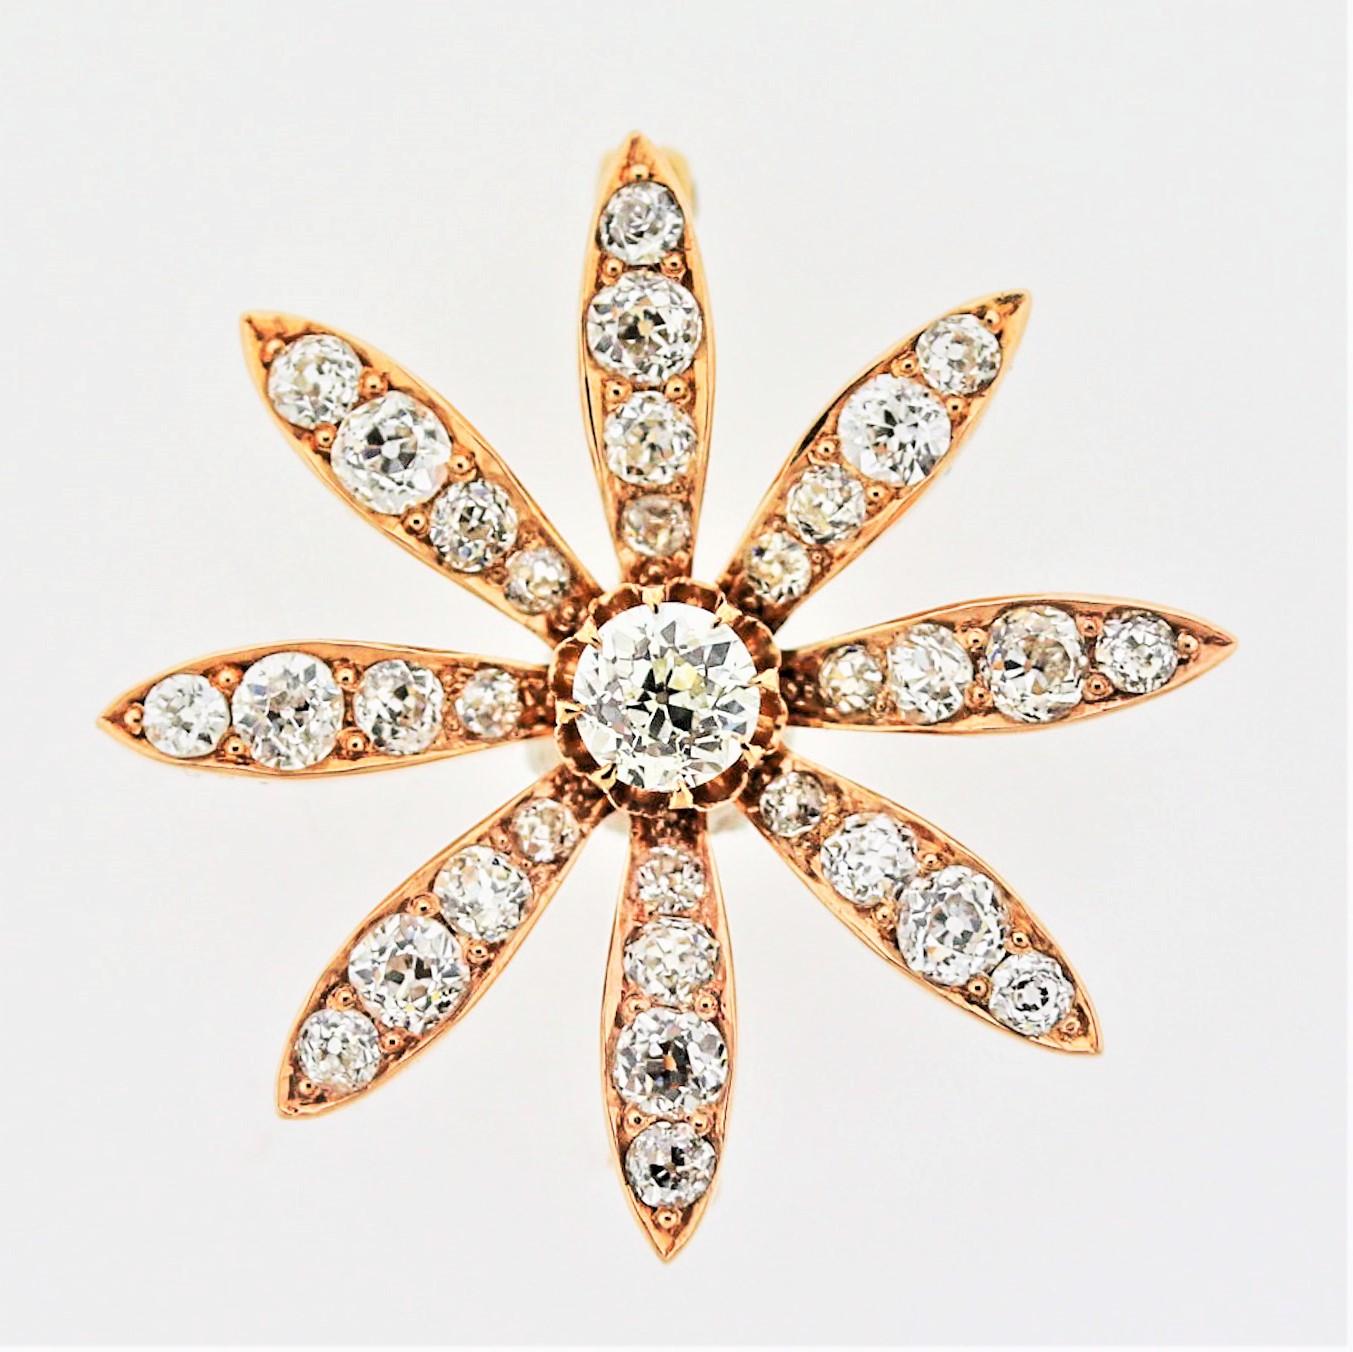 A lovely antique from the Victorian era, circa 1890, with all the classic Victorian features. The diamonds are bright white chunky old European-cut diamonds which weigh a total of approximately 3 carats. The center diamond is about half-a-carat and